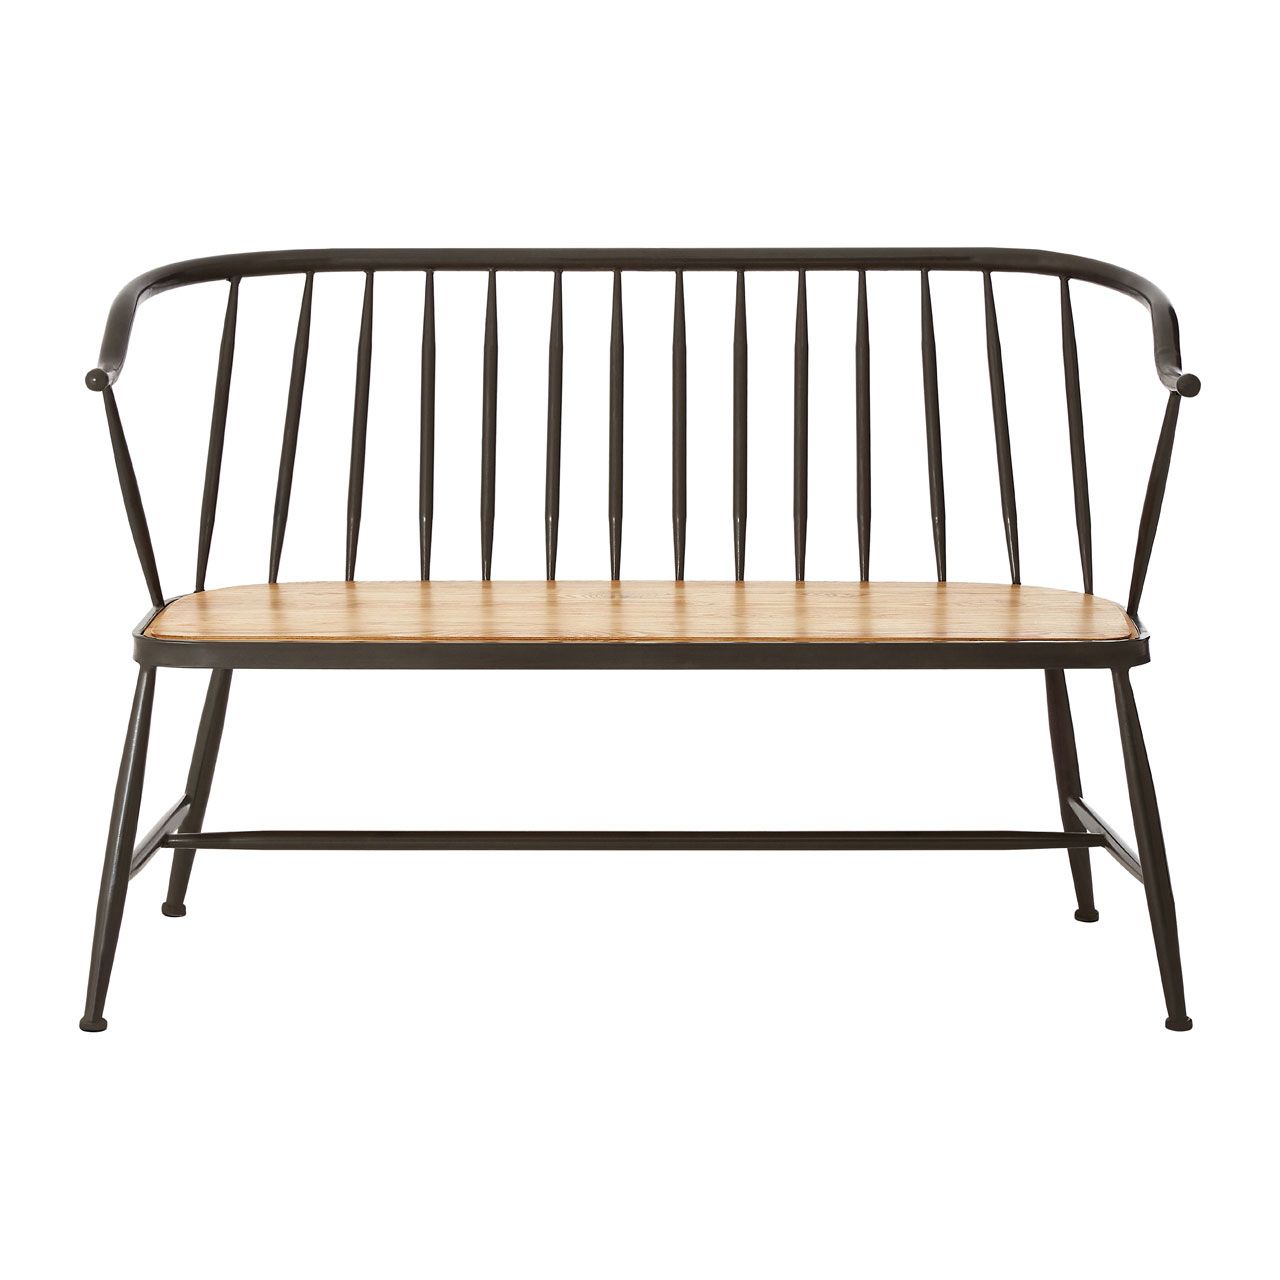 Foundry Wooden Bench